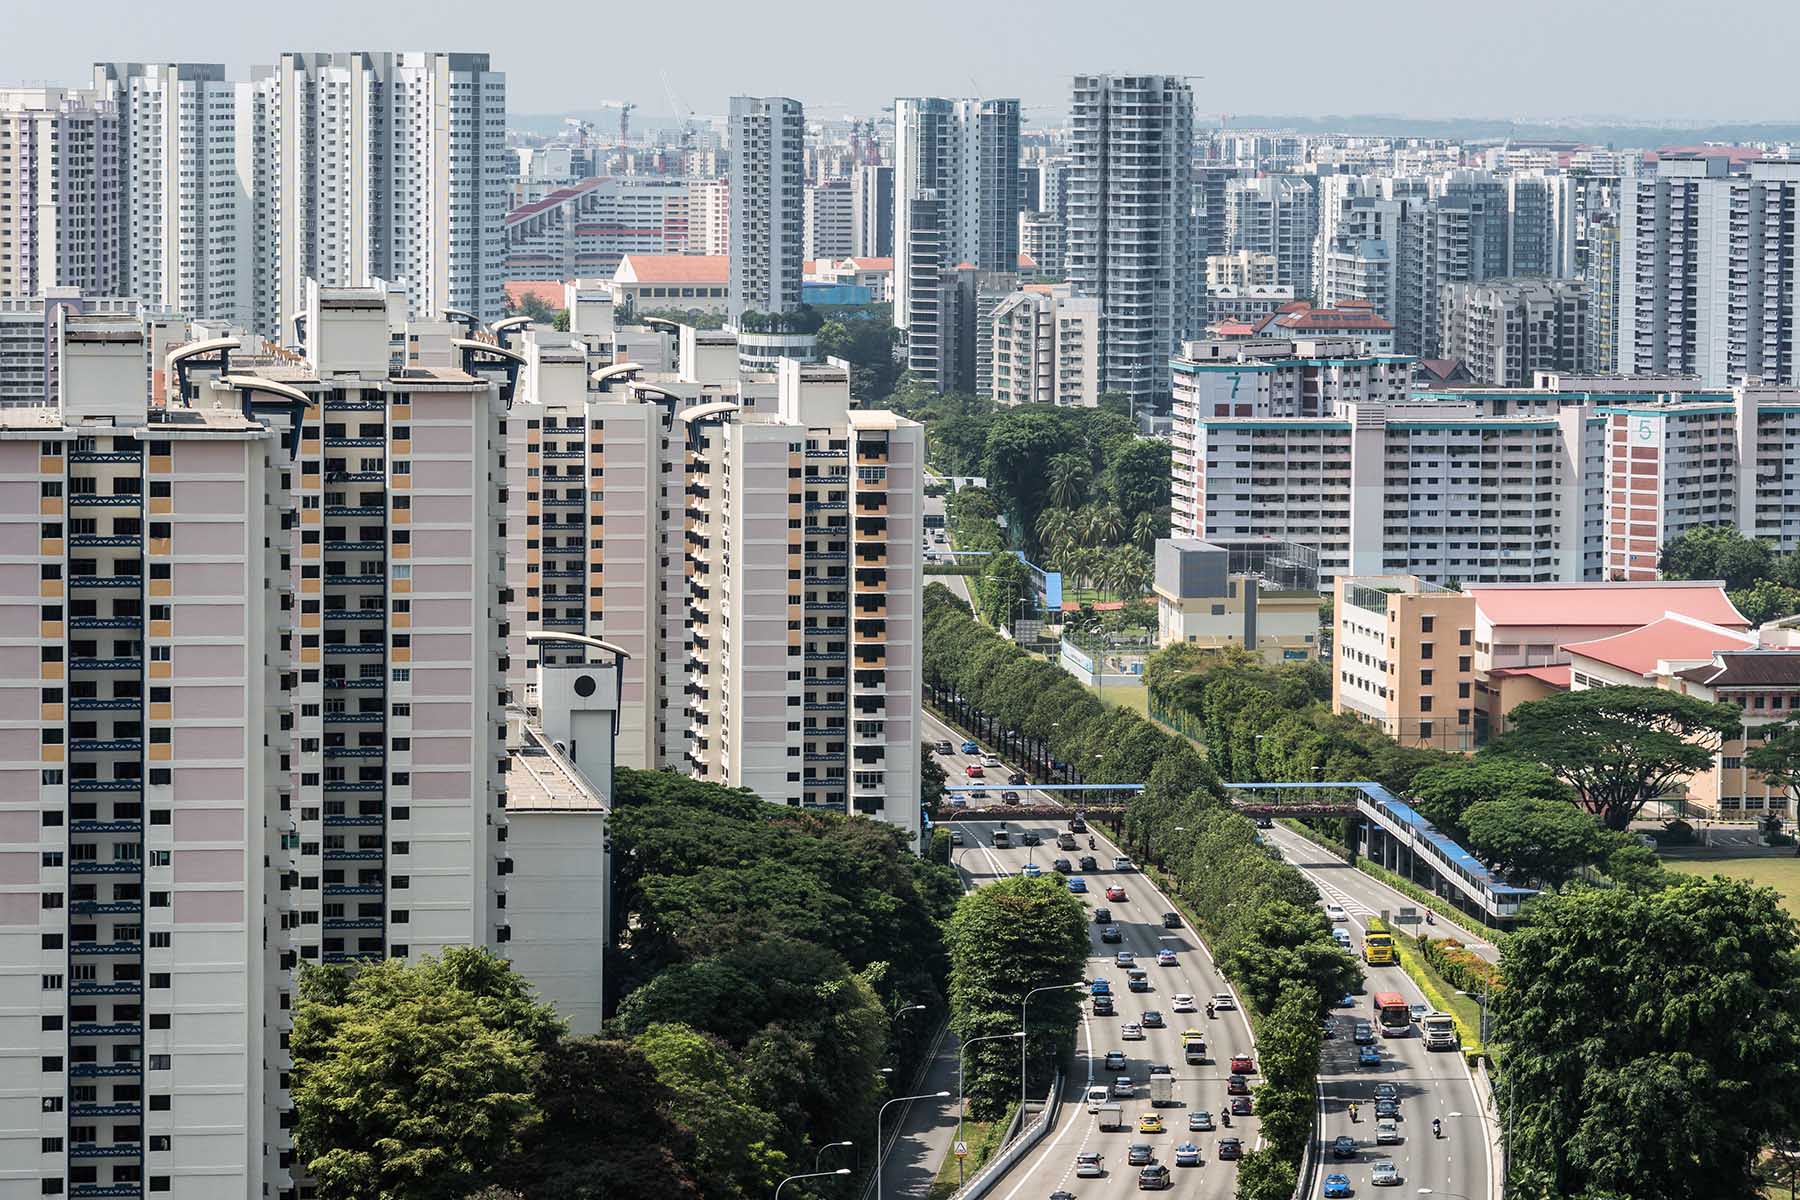 Aerial view of heavy traffic on highway in a residential district with many modern condo and apartment buildings in Singapore.